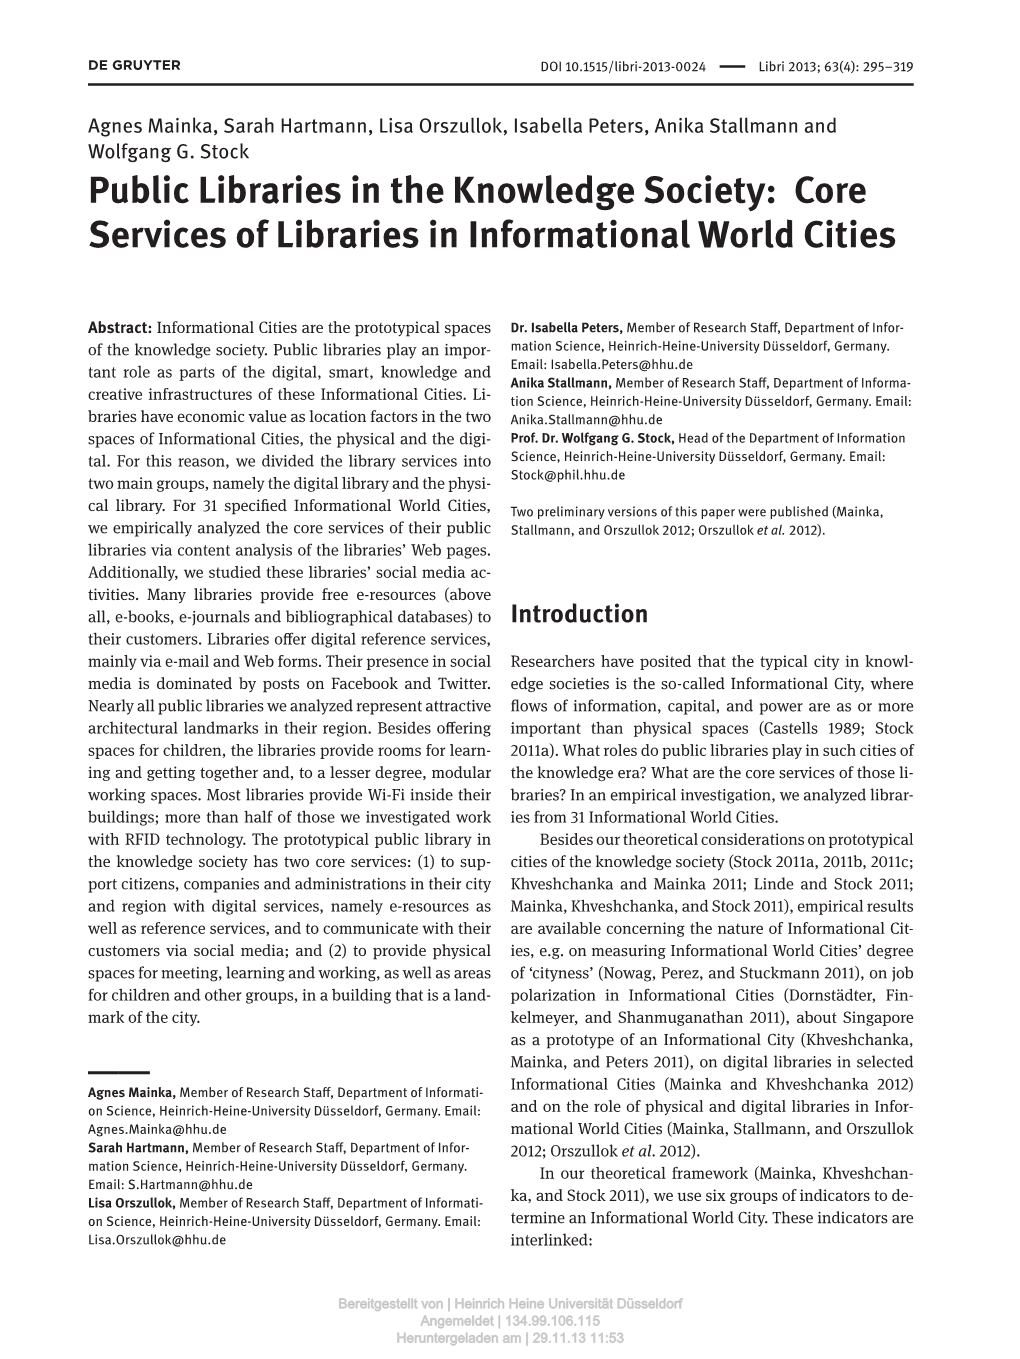 Core Services of Libraries in Informational World Cities